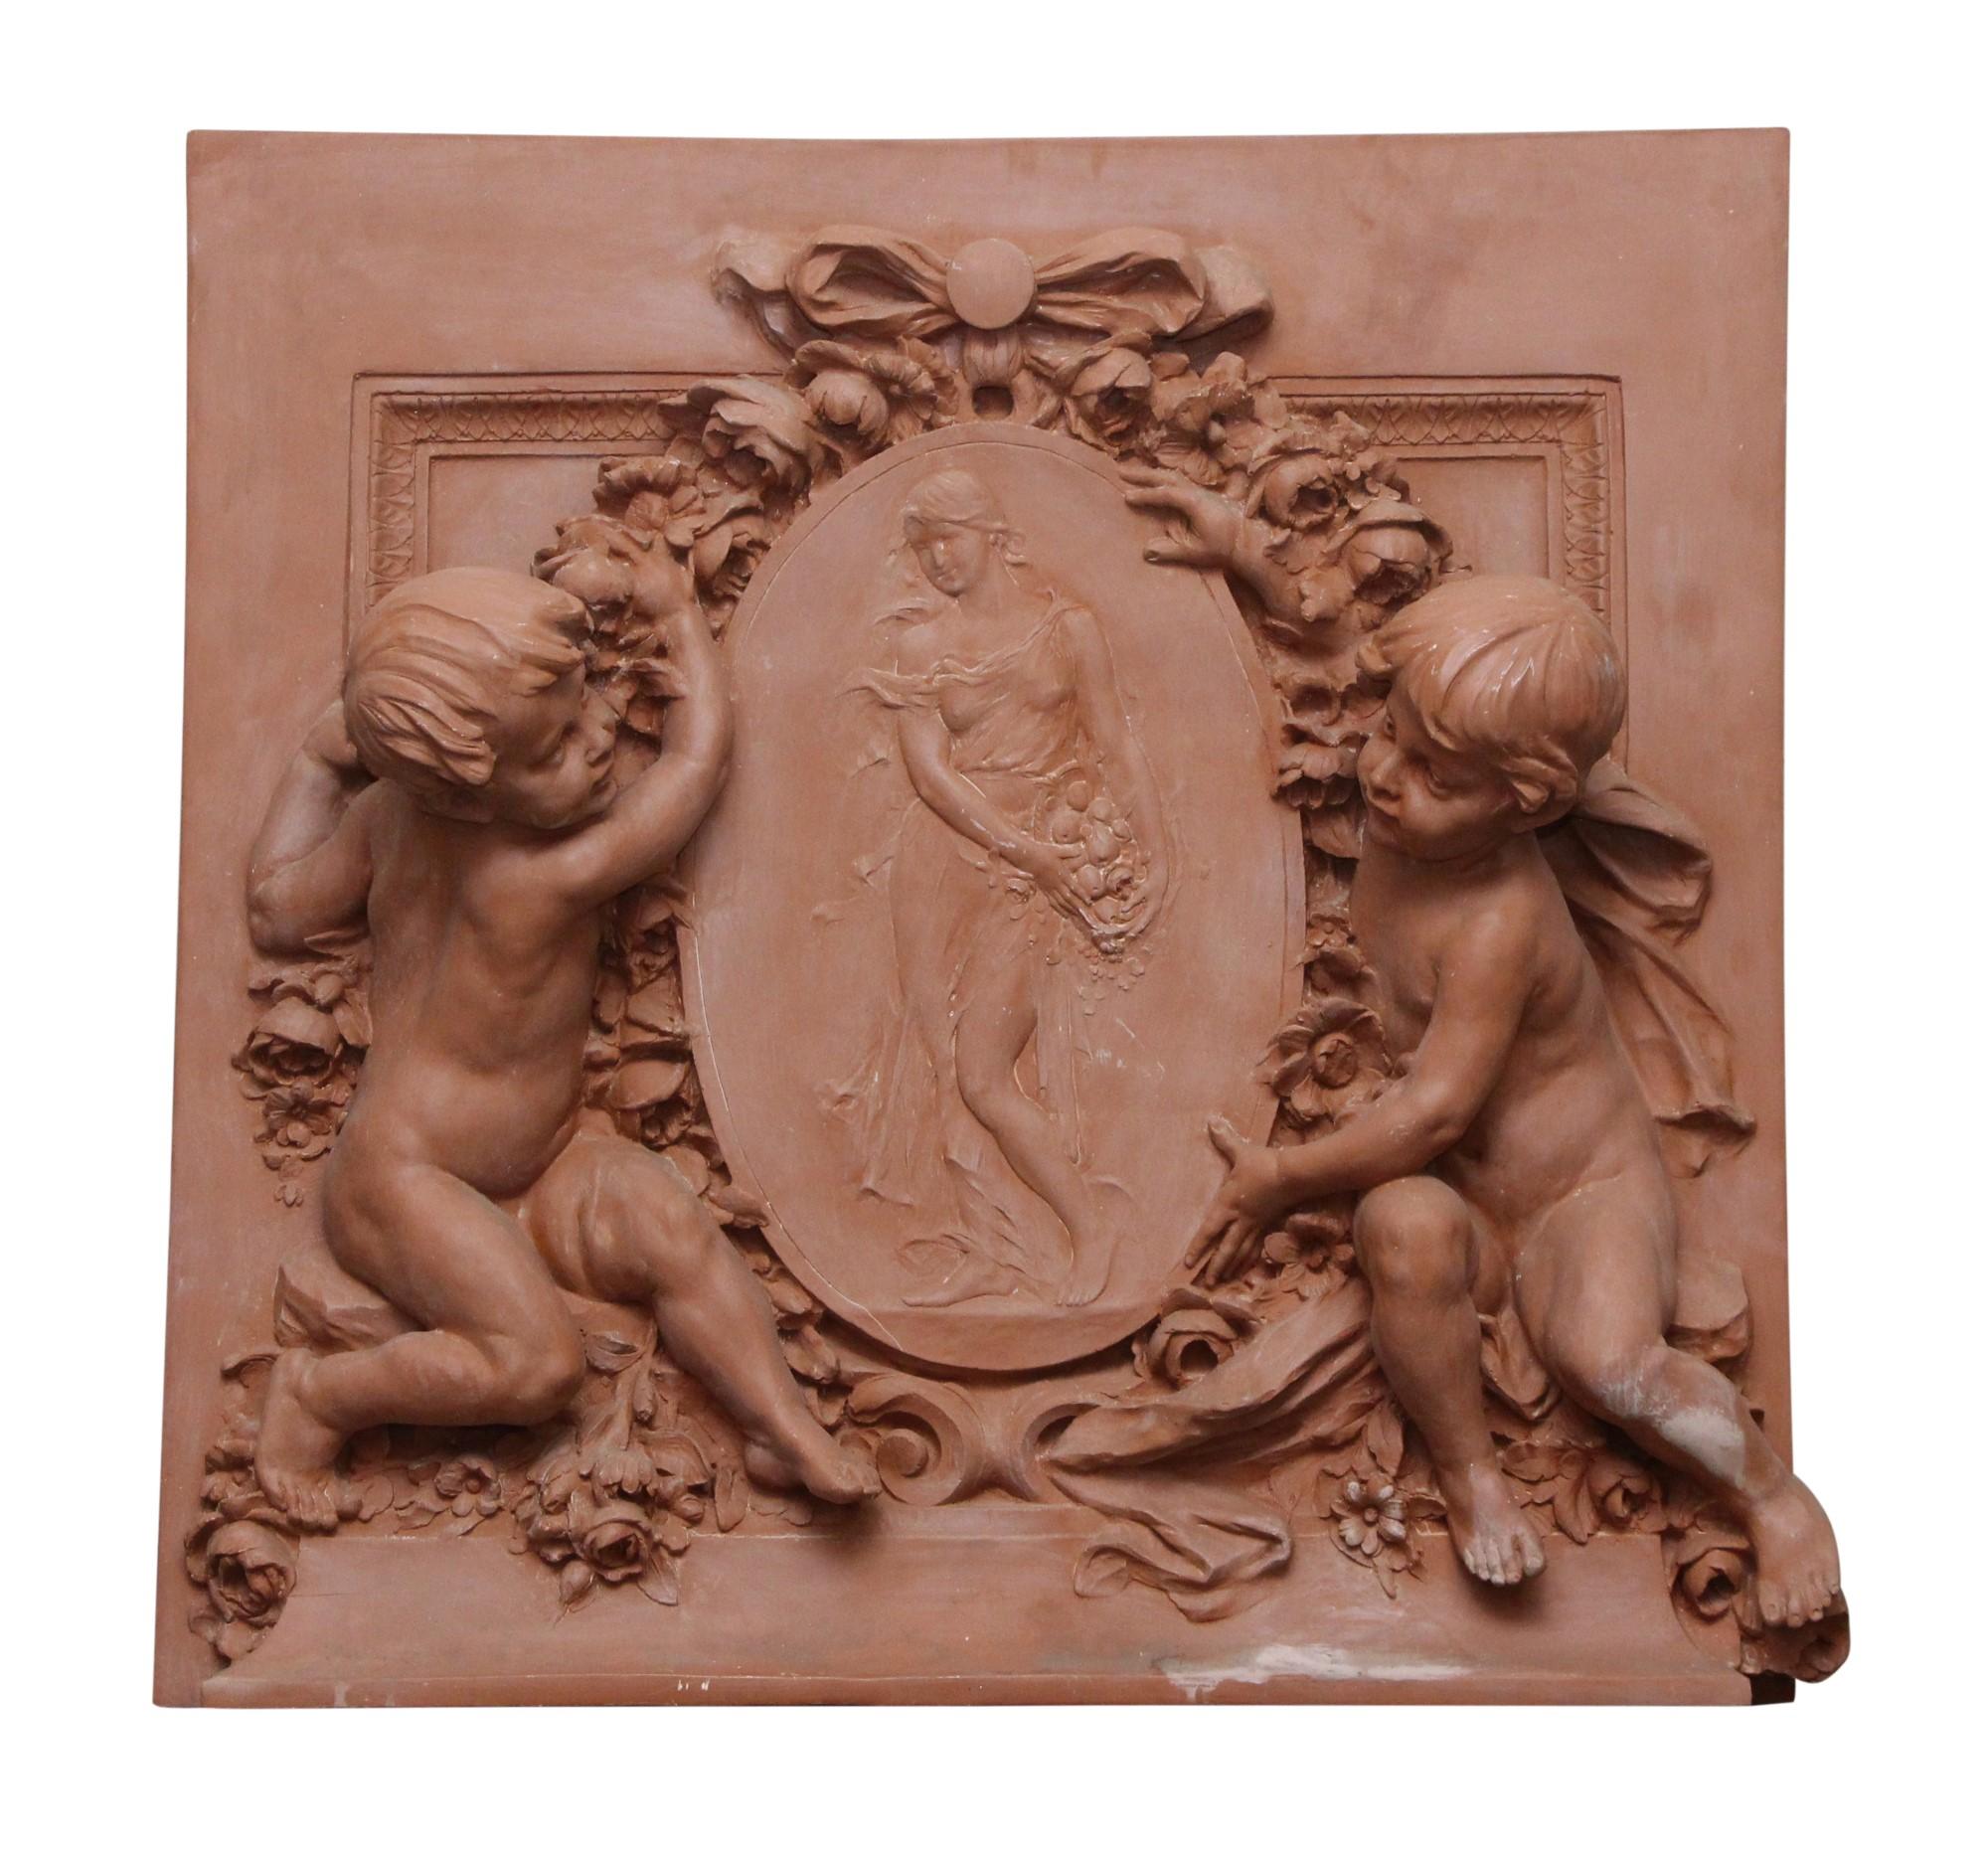 Cast fiberglass replica wall mount frieze showing the Goddess Iris surrounded by two cherubs. Please note, this item is located in our Scranton, PA location.